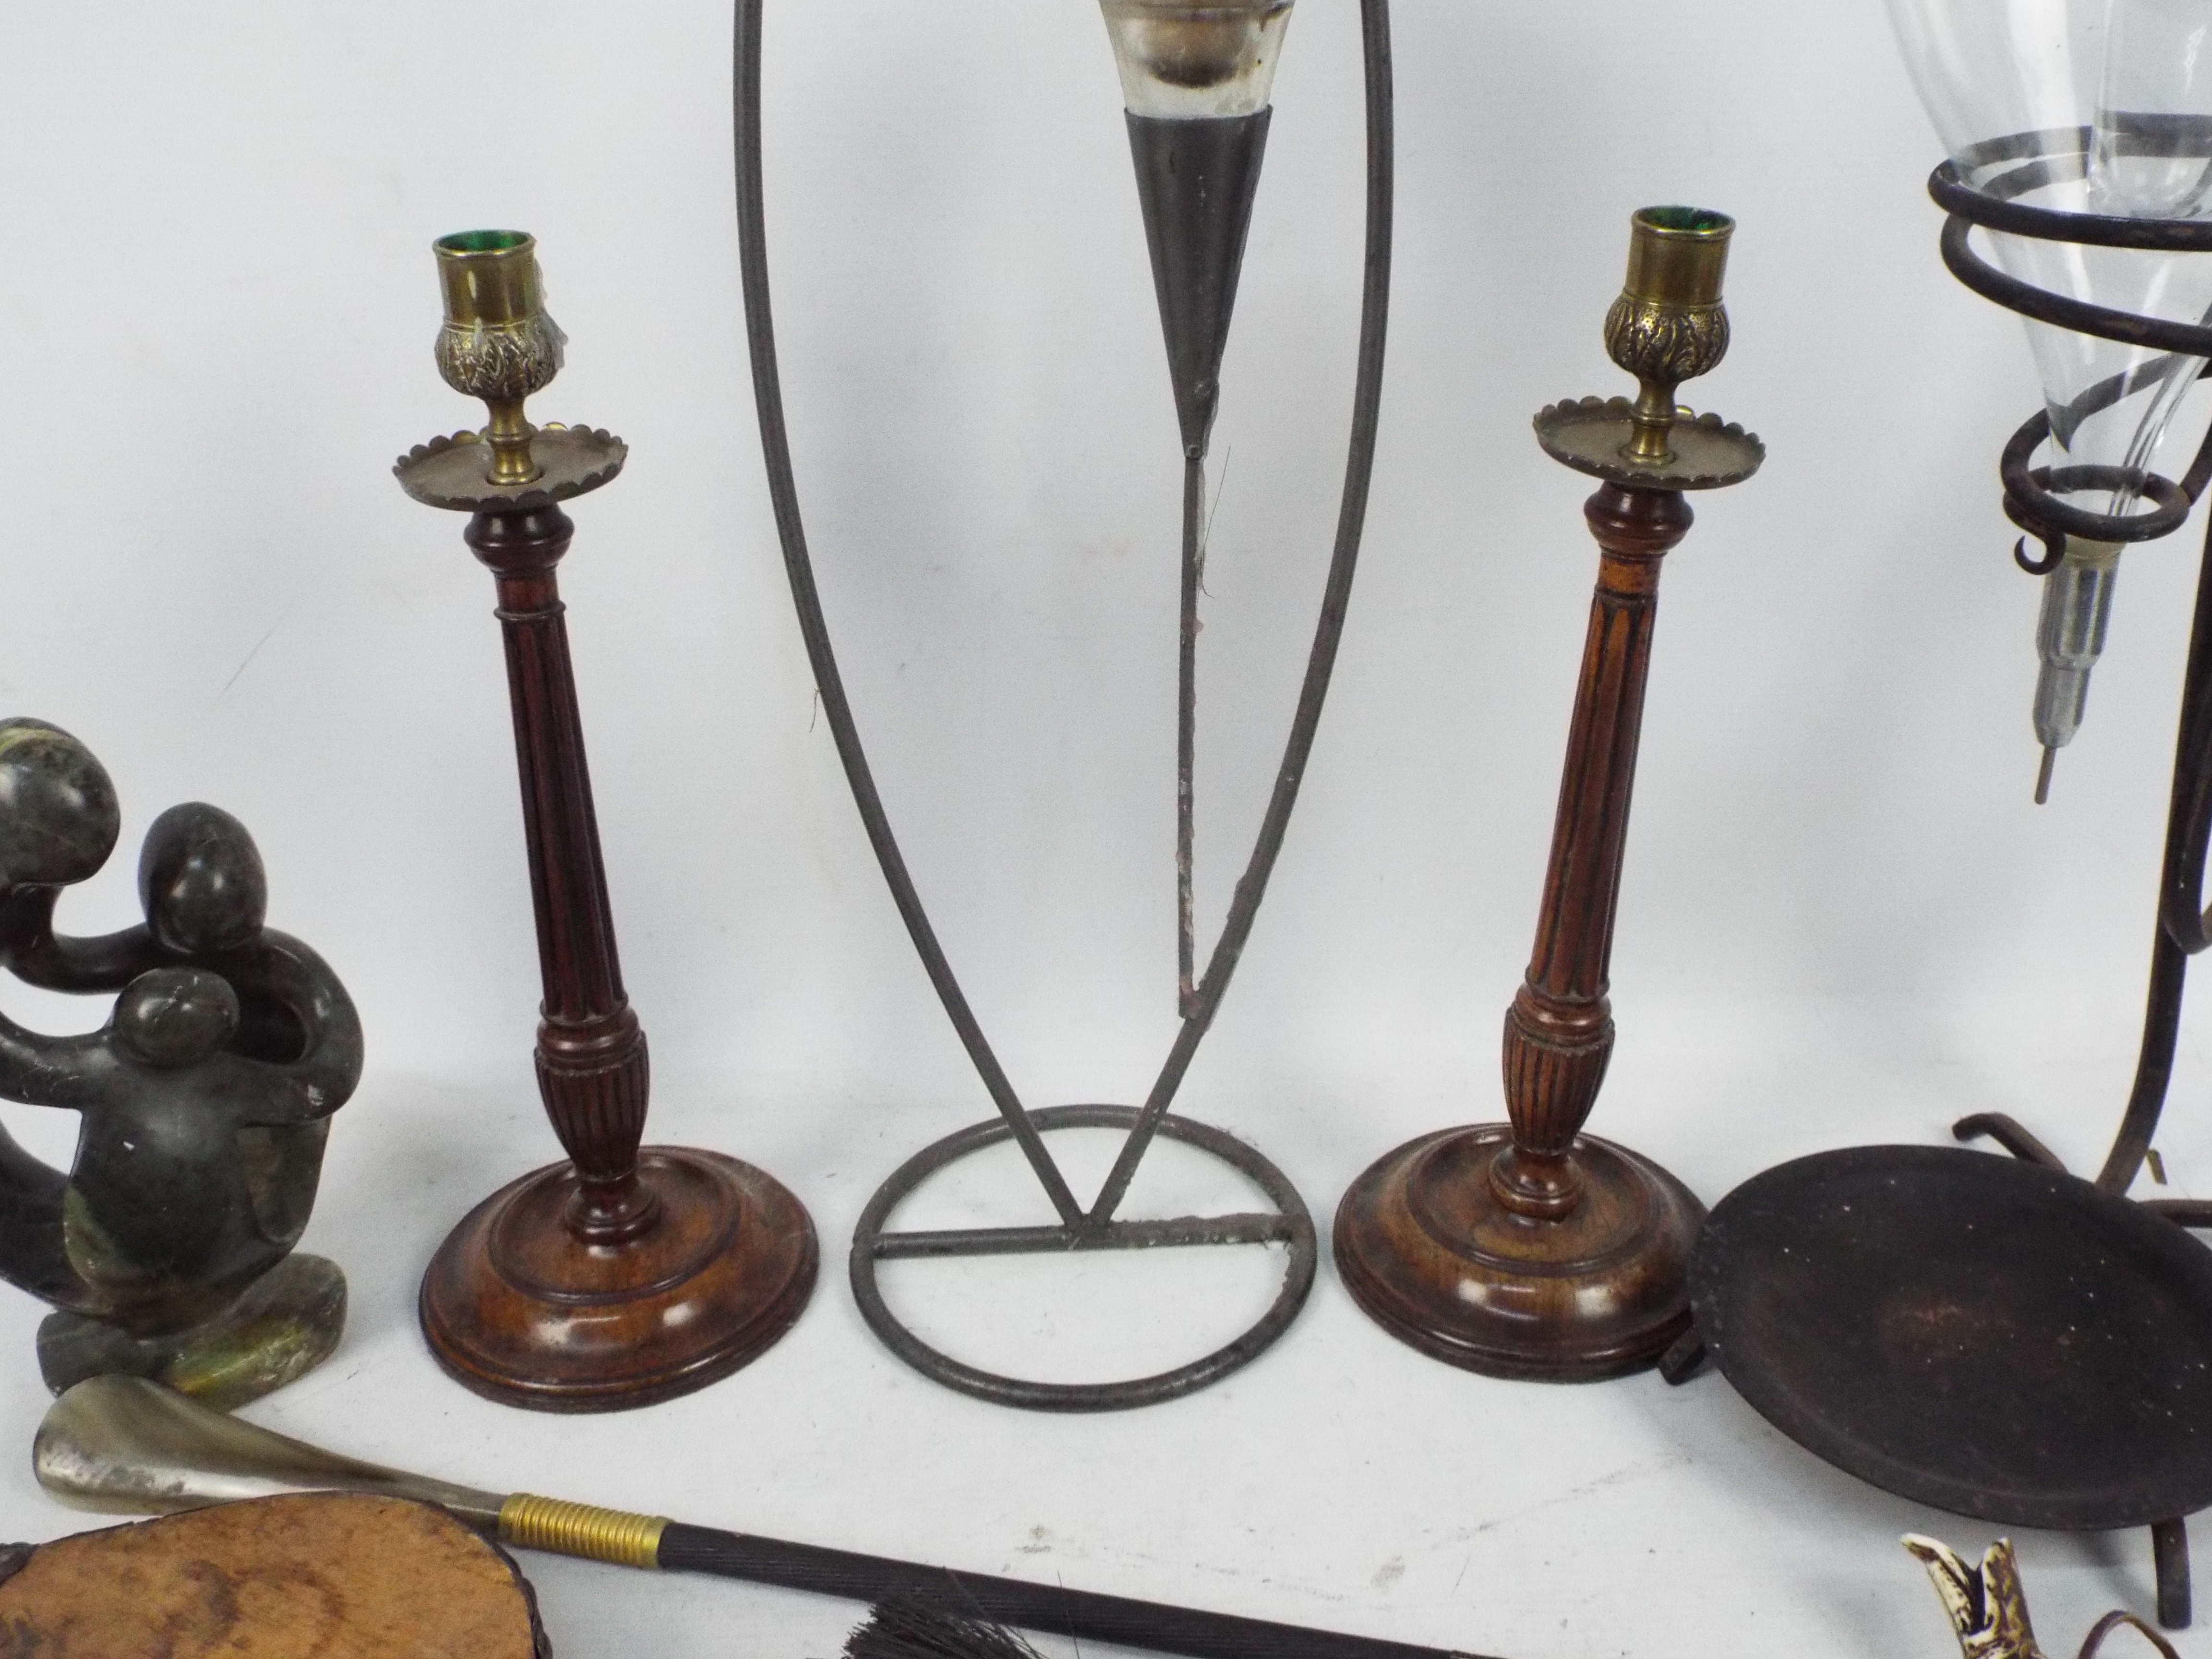 Lot to include vintage bellows, candlest - Image 3 of 5